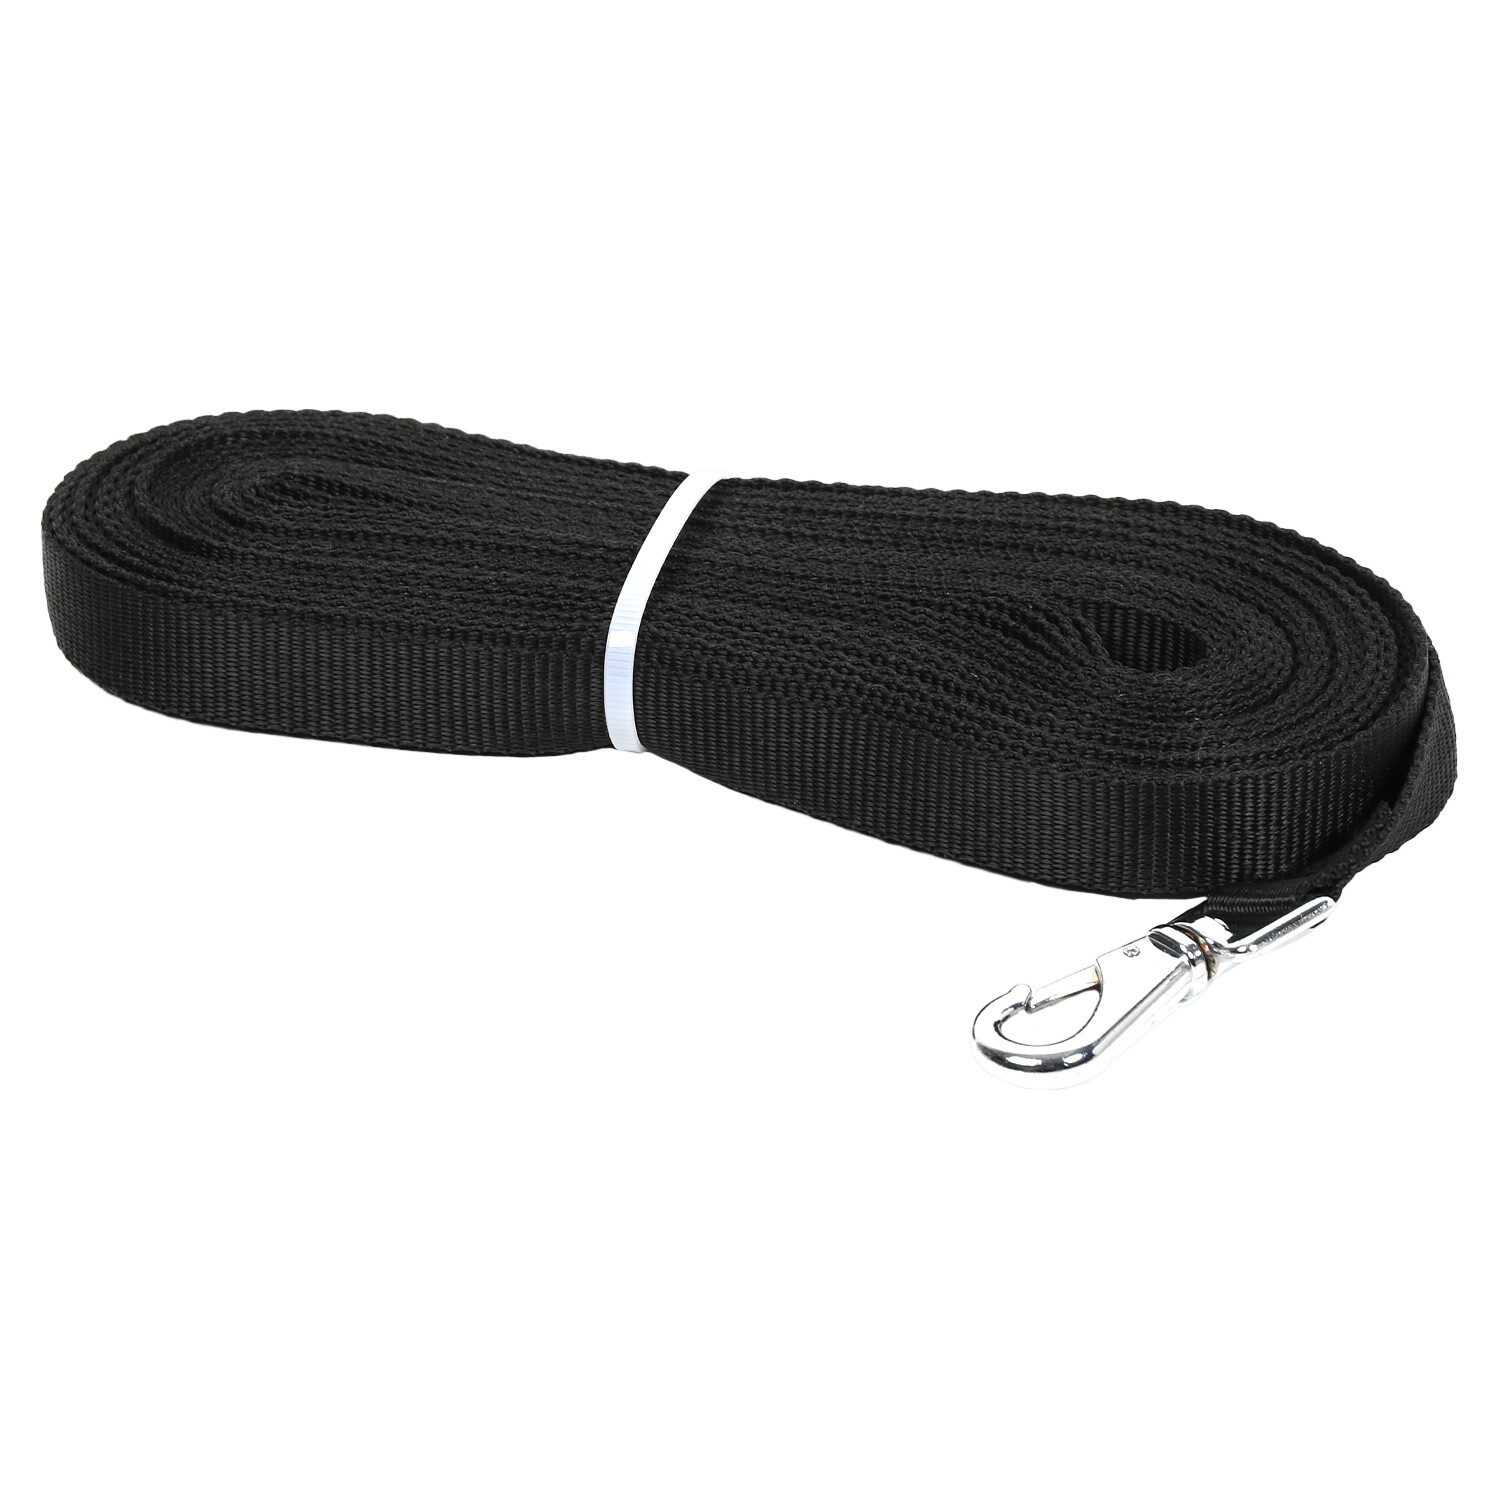 Clever Paws 10m Recall Control Dog Training Lead Image